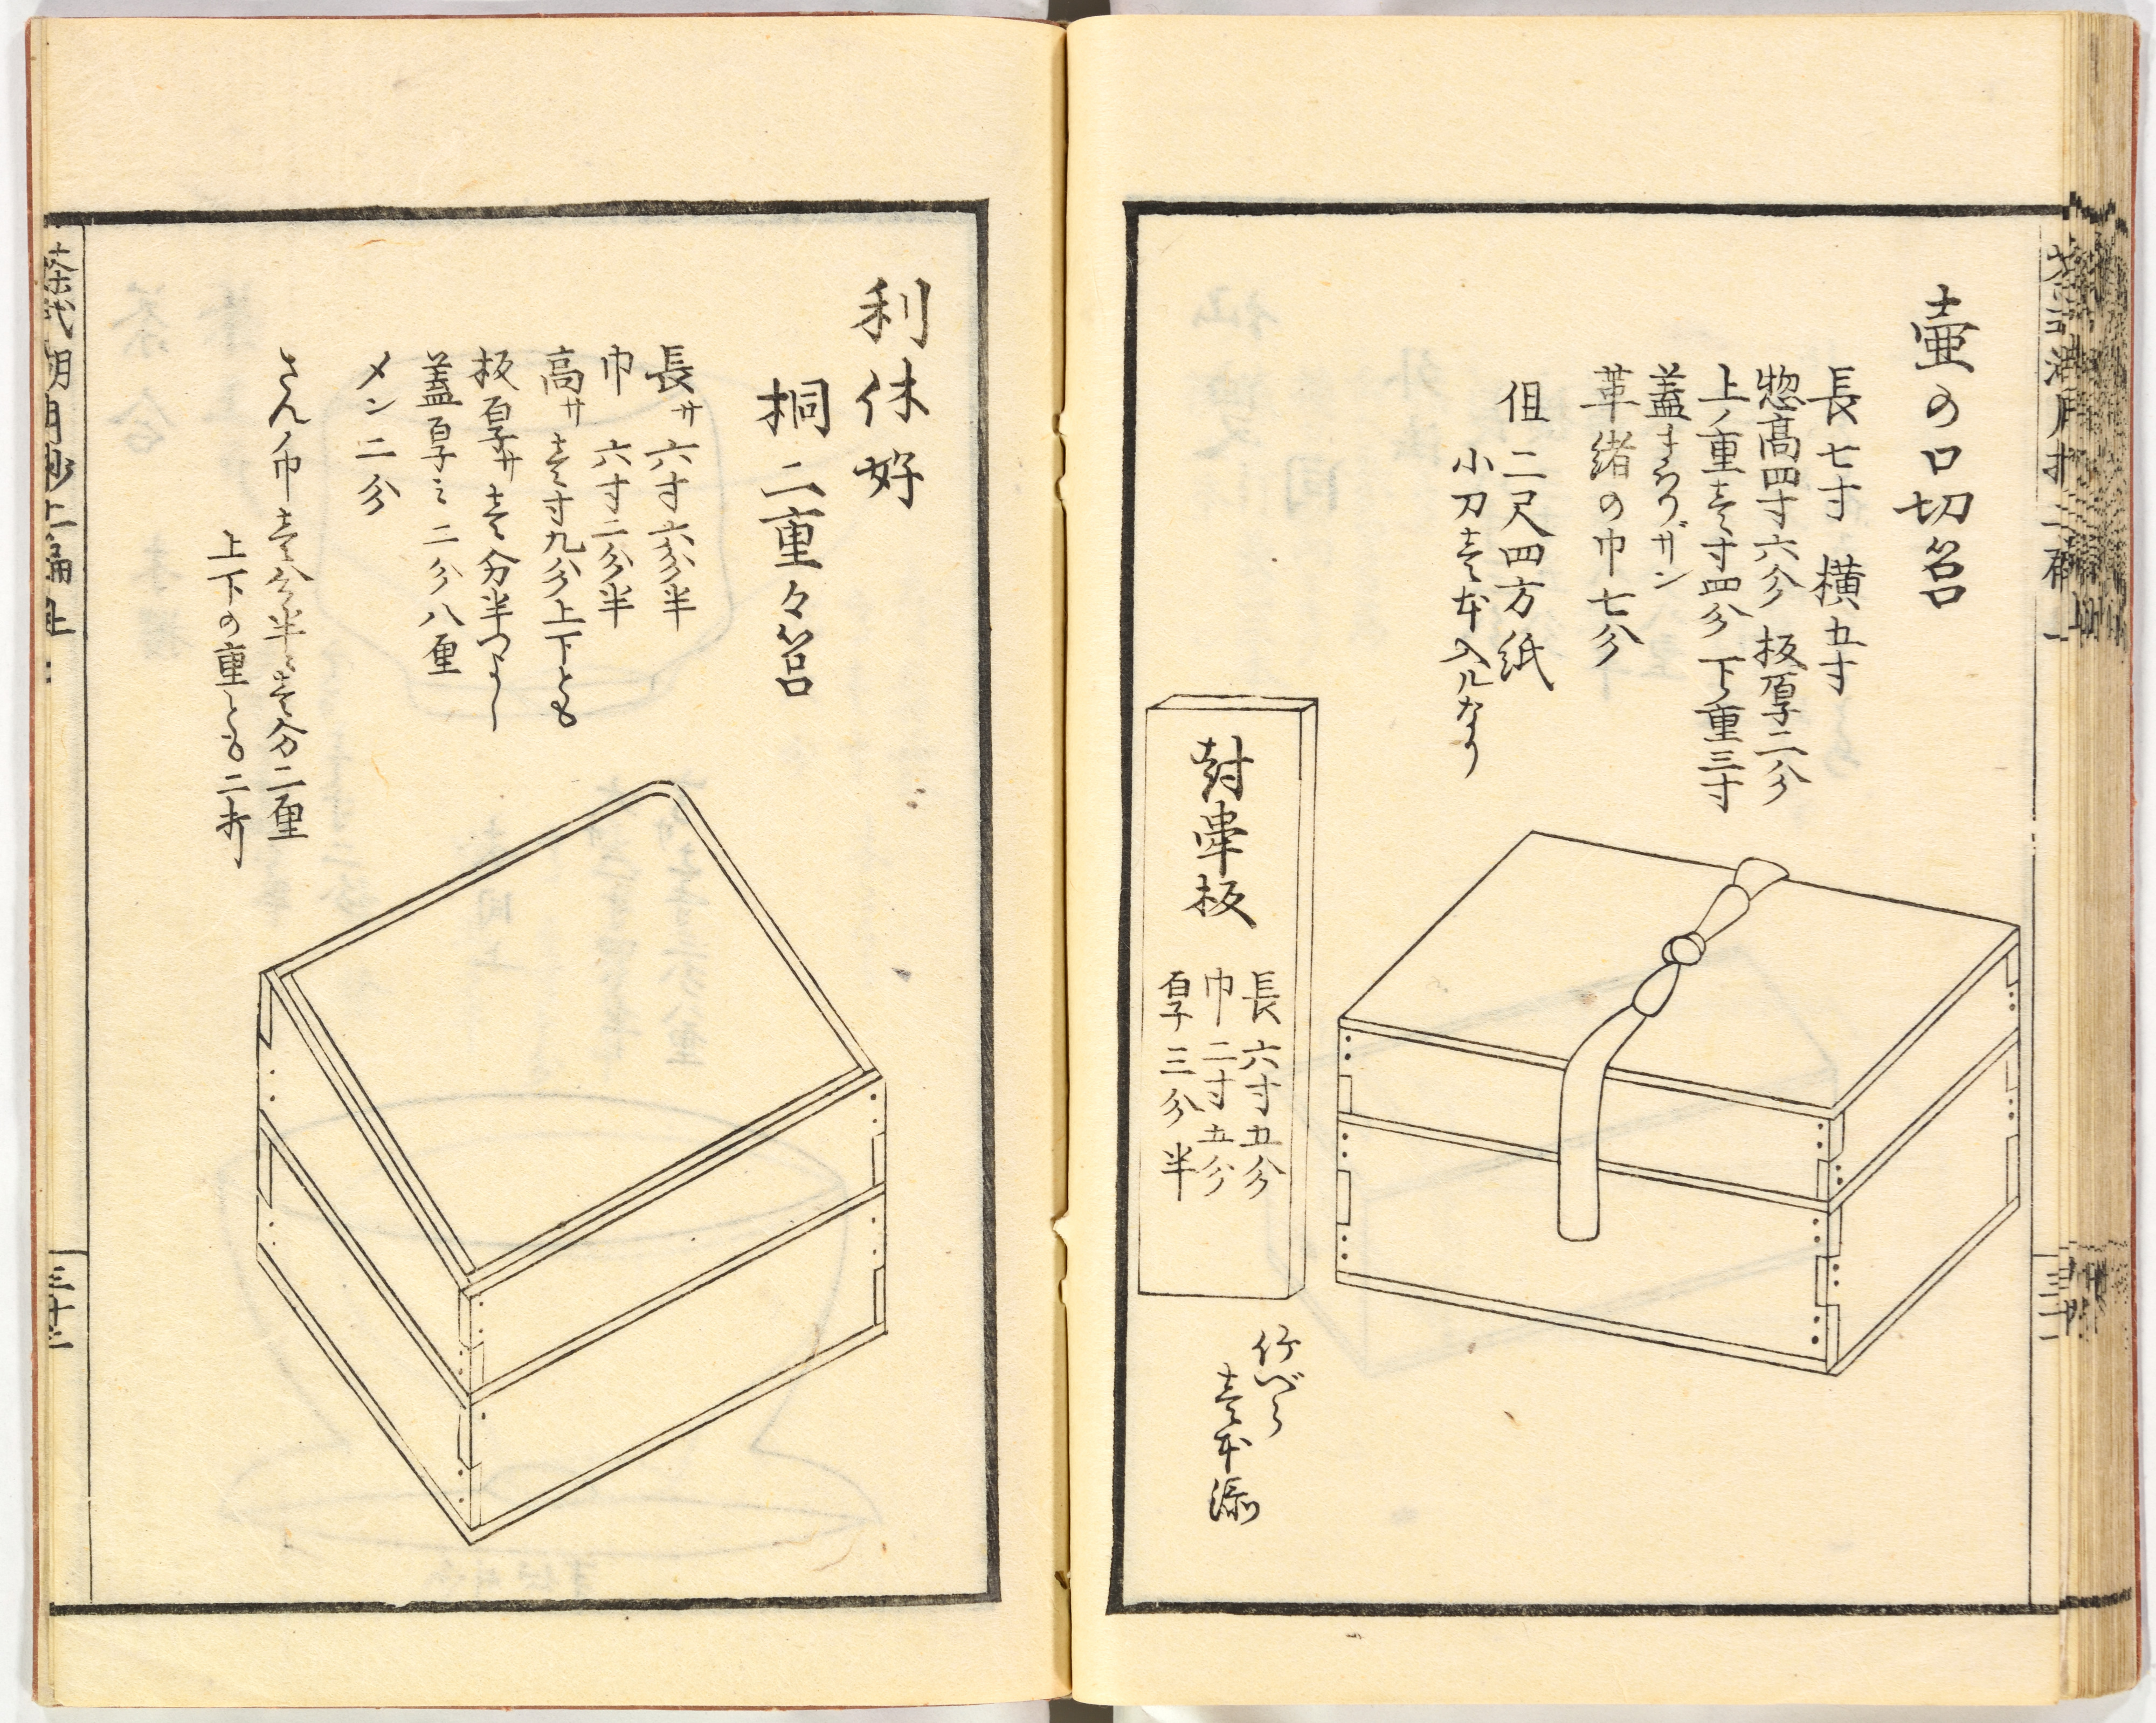 1,000+ Historic Japanese Illustrated Books Digitized & Put Online by the  Smithsonian: From the Edo & Meji Eras (1600-1912)